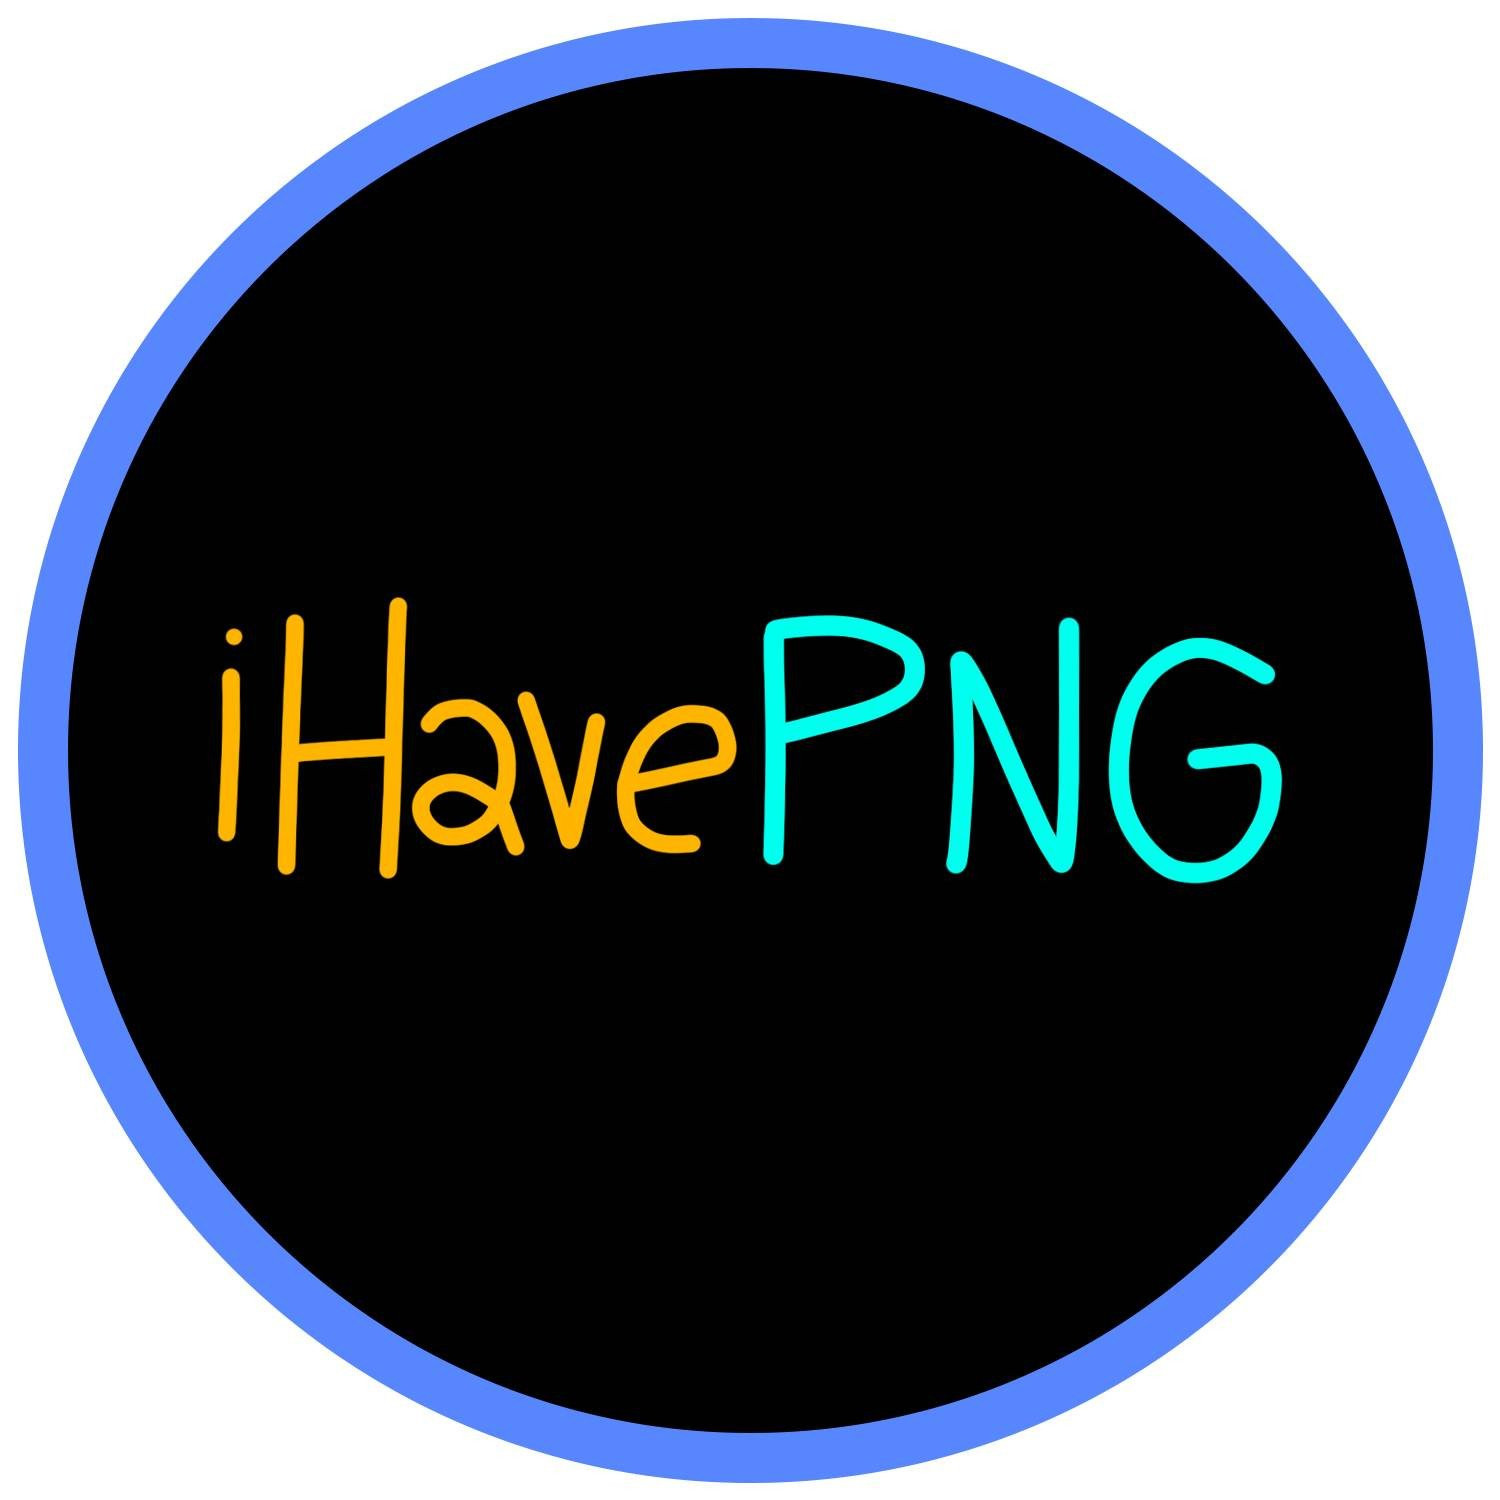 iHavePNG's profile picture